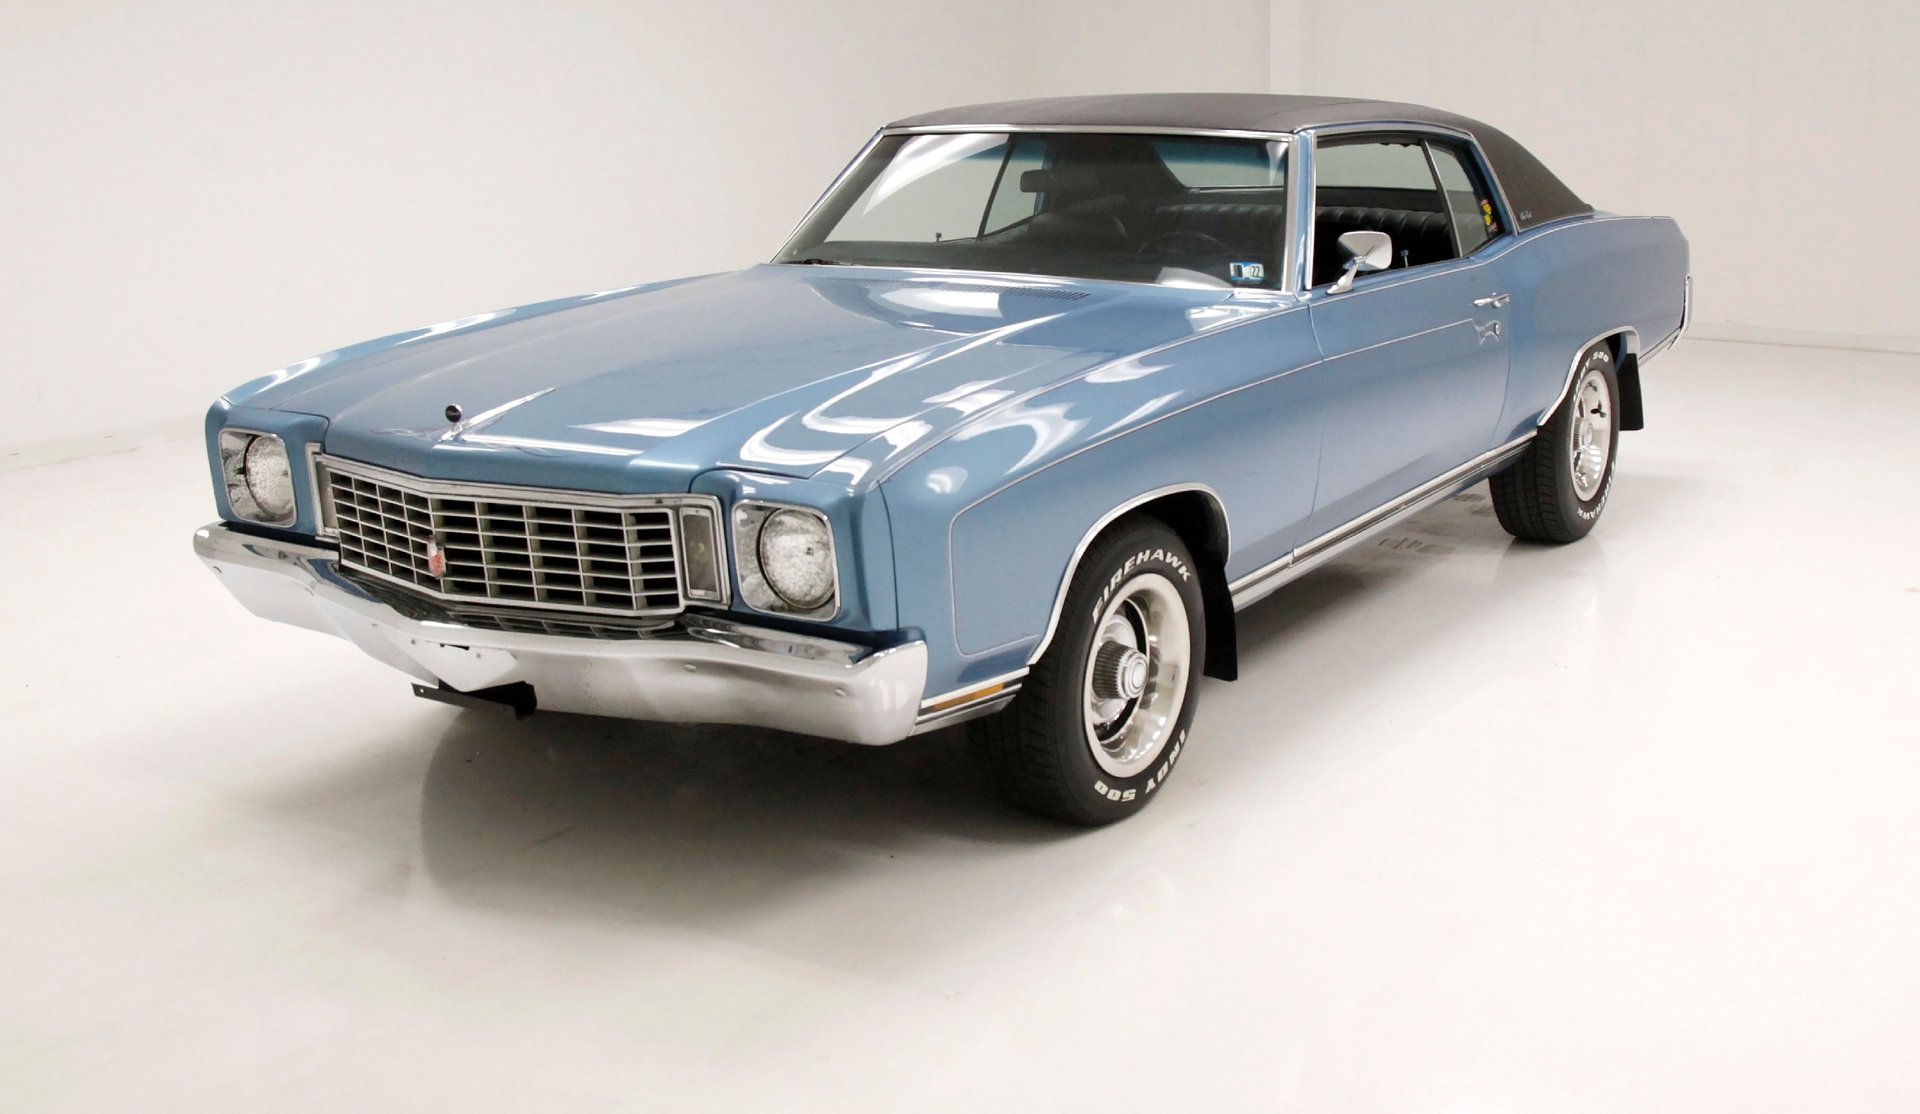 1972 Chevrolet Monte Carlo - The peak of its golden age